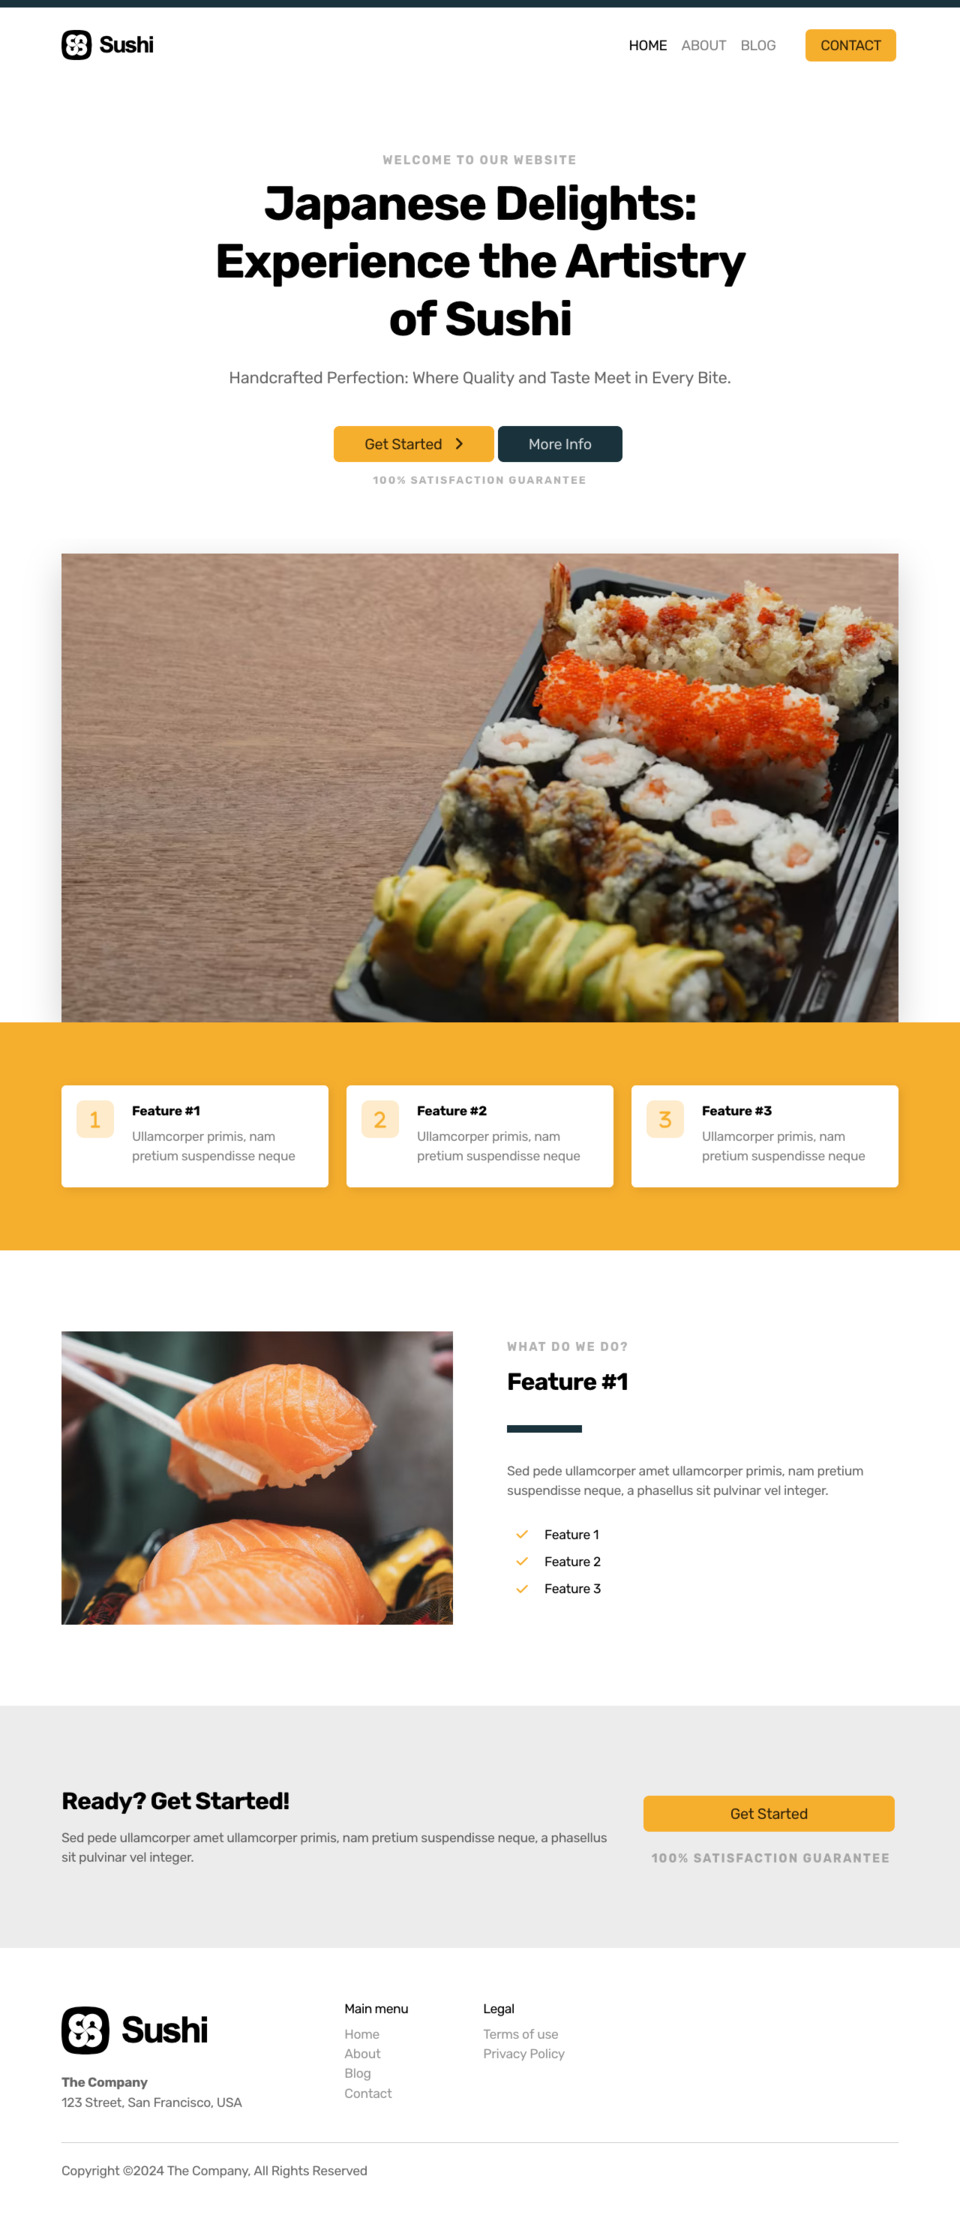 Sushi Website Template - Ideal for small business owners in the food industry, including sushi restaurants, Japanese cuisine eateries, seafood bars, and more.